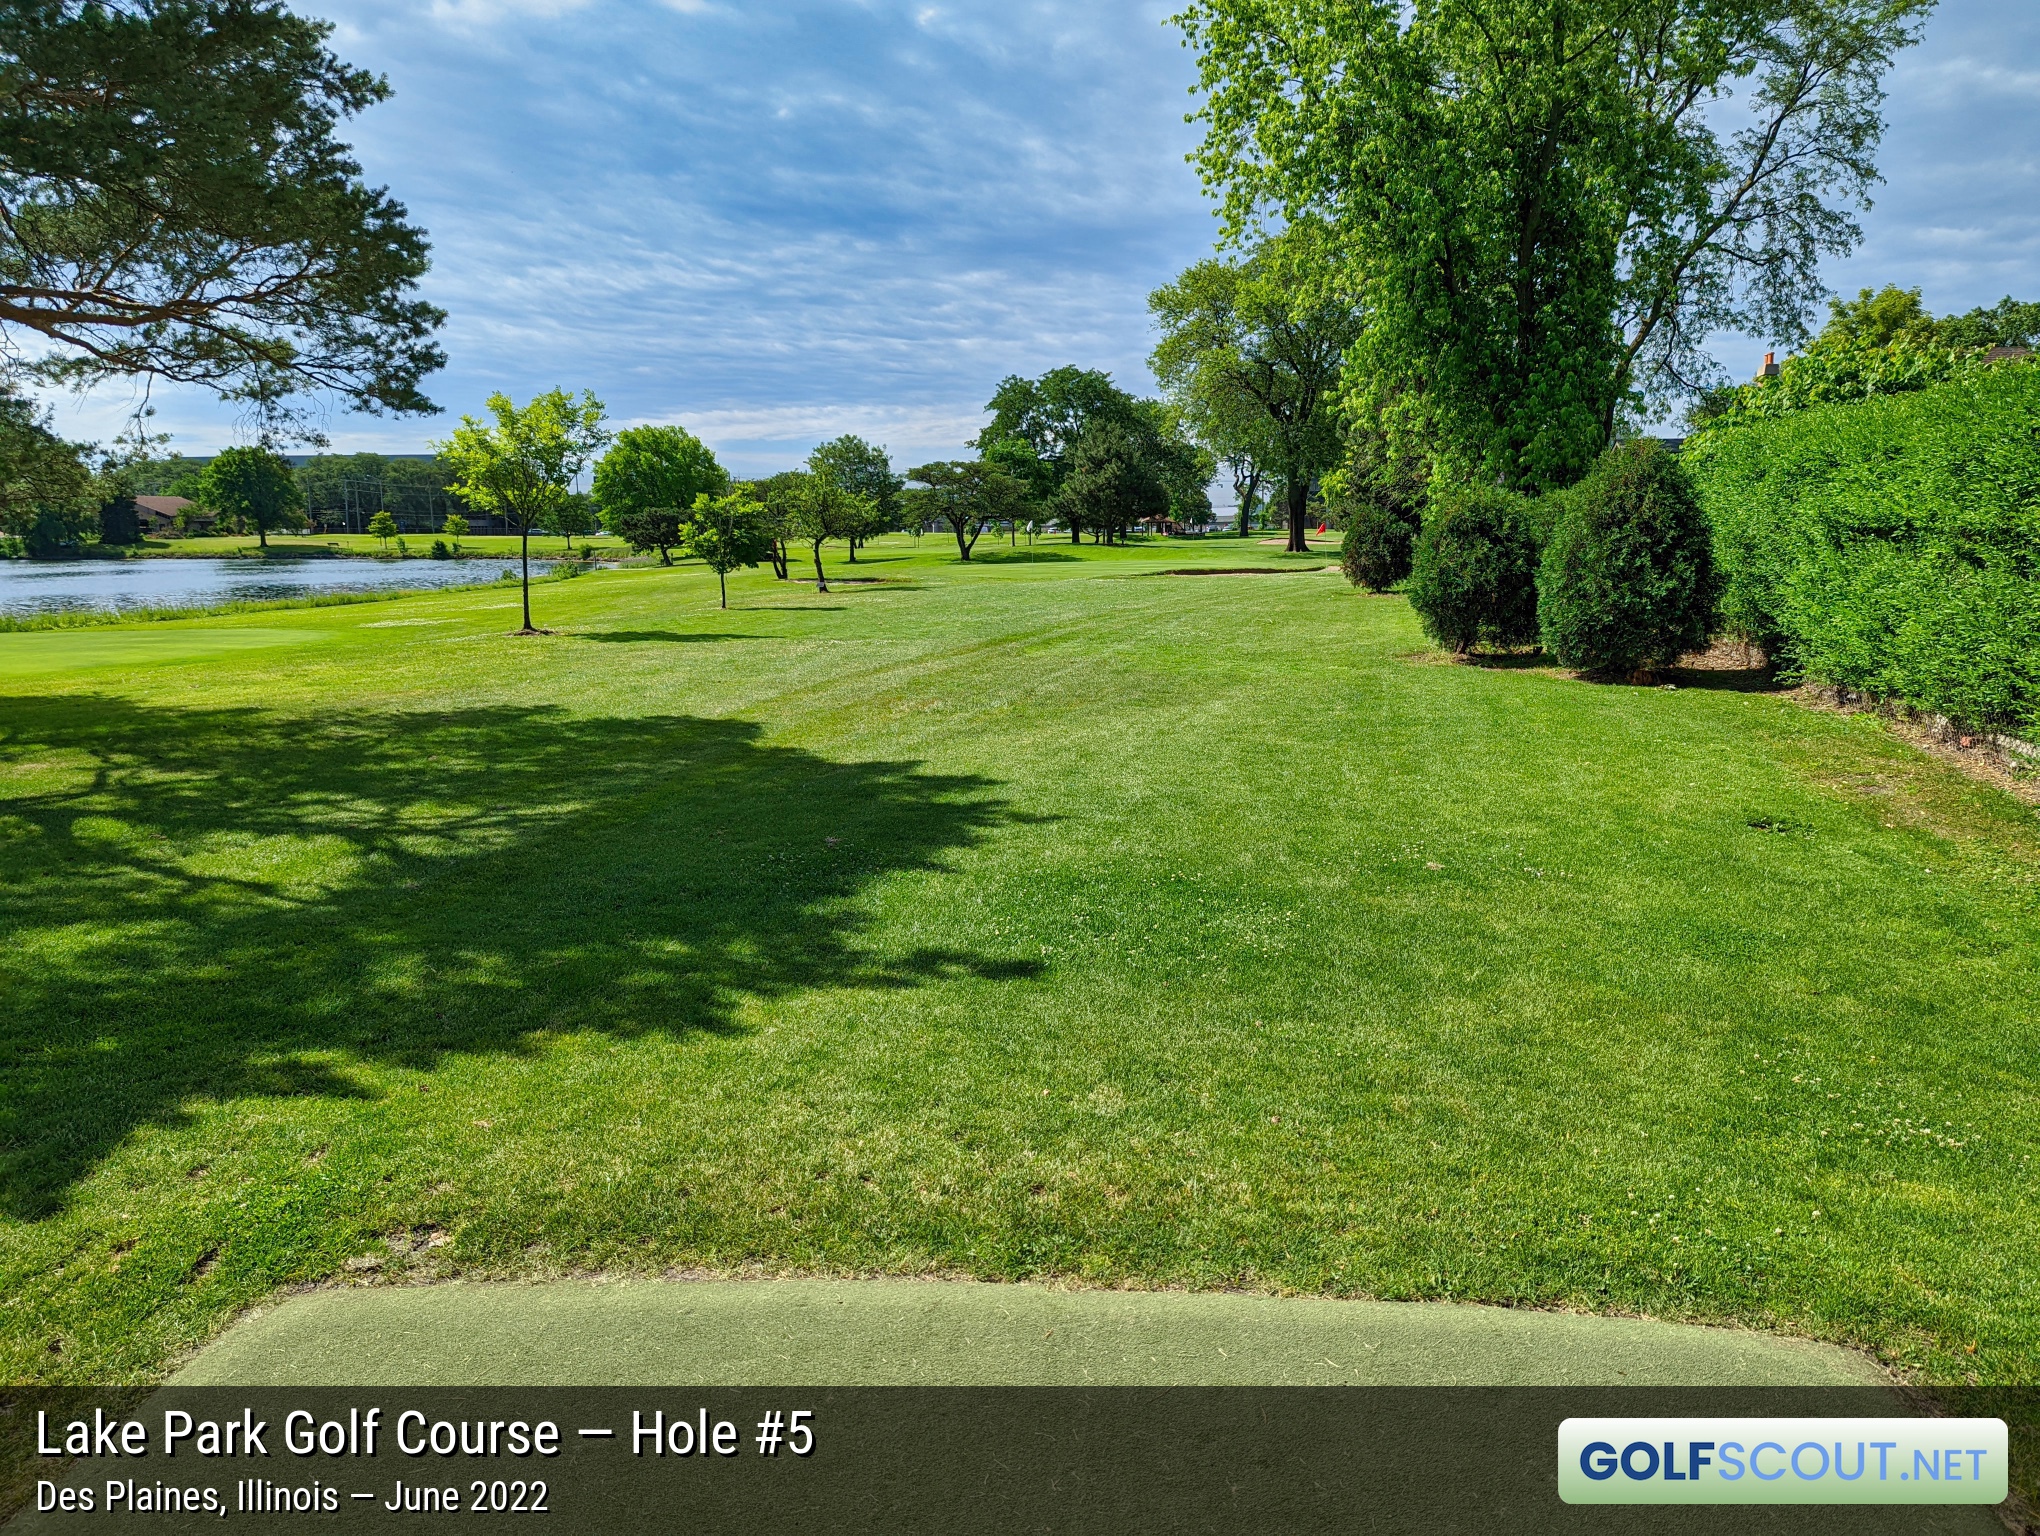 Photo of hole #5 at Lake Park Golf Course in Des Plaines, Illinois. 